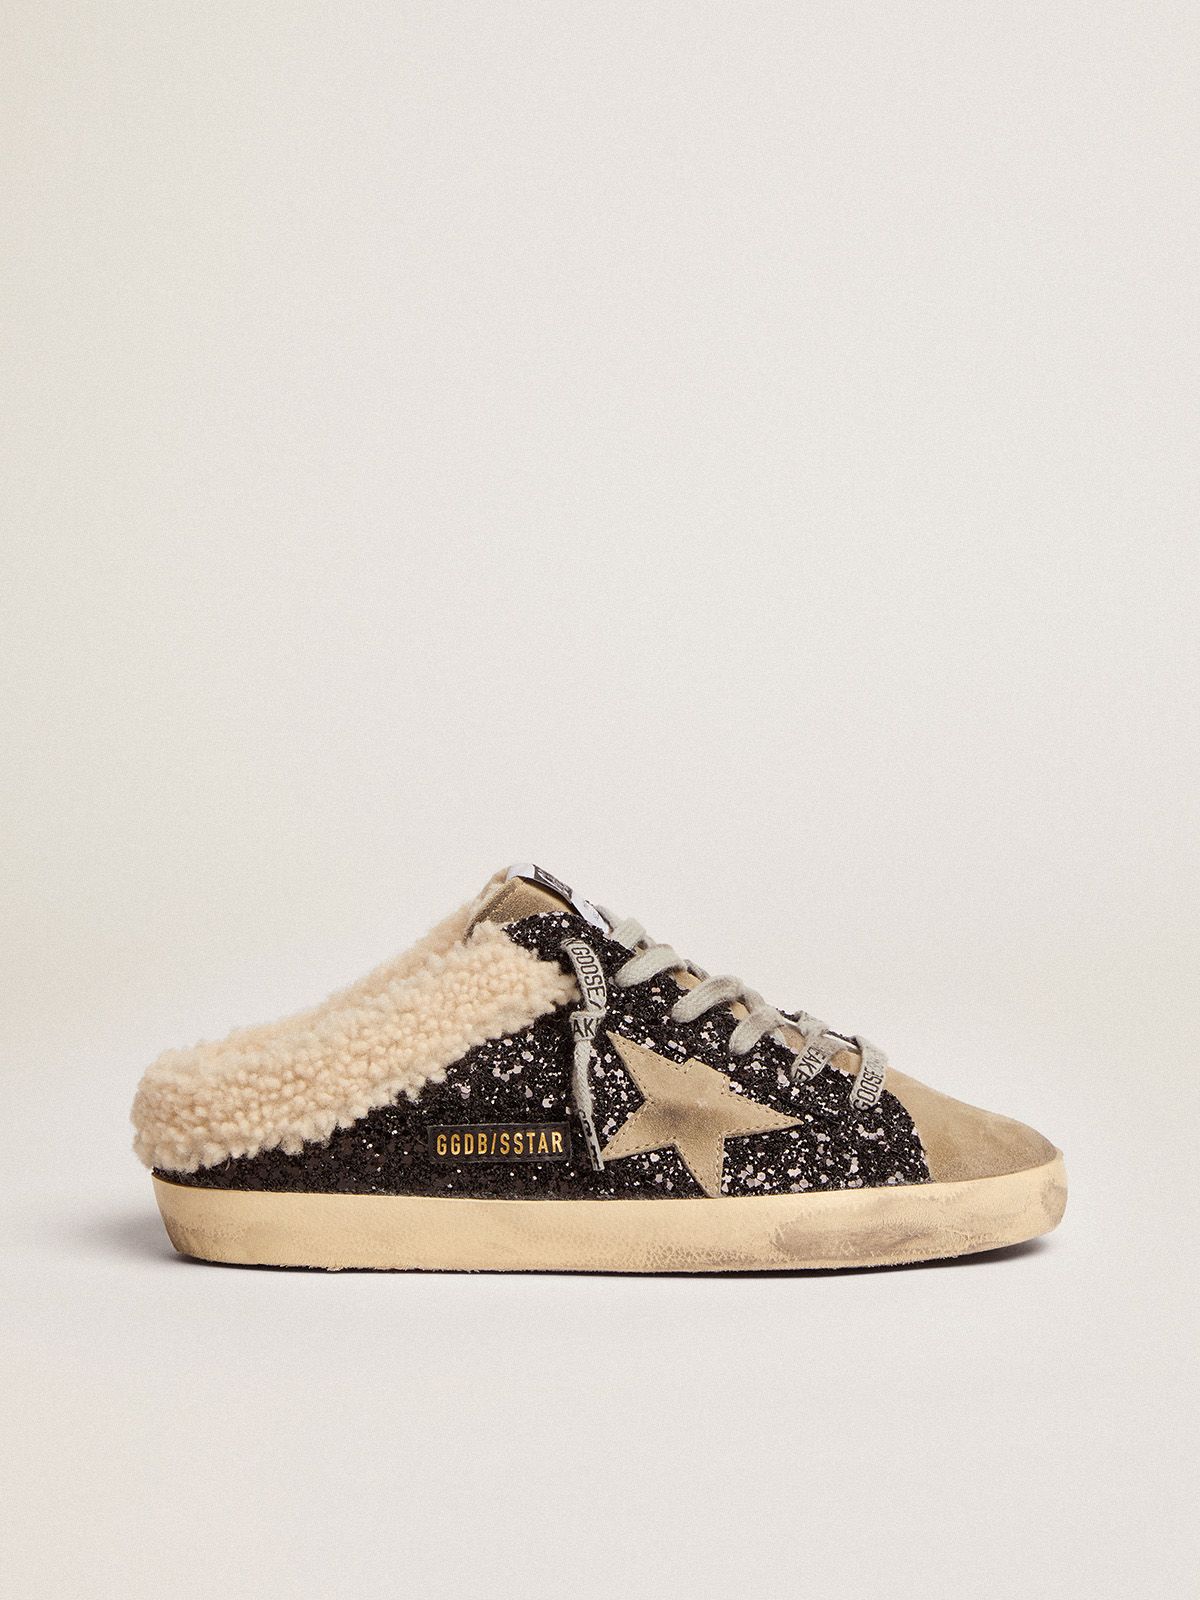 golden goose black in shearling LTD star glitter Sabots suede and lining with dove-gray Super-Star